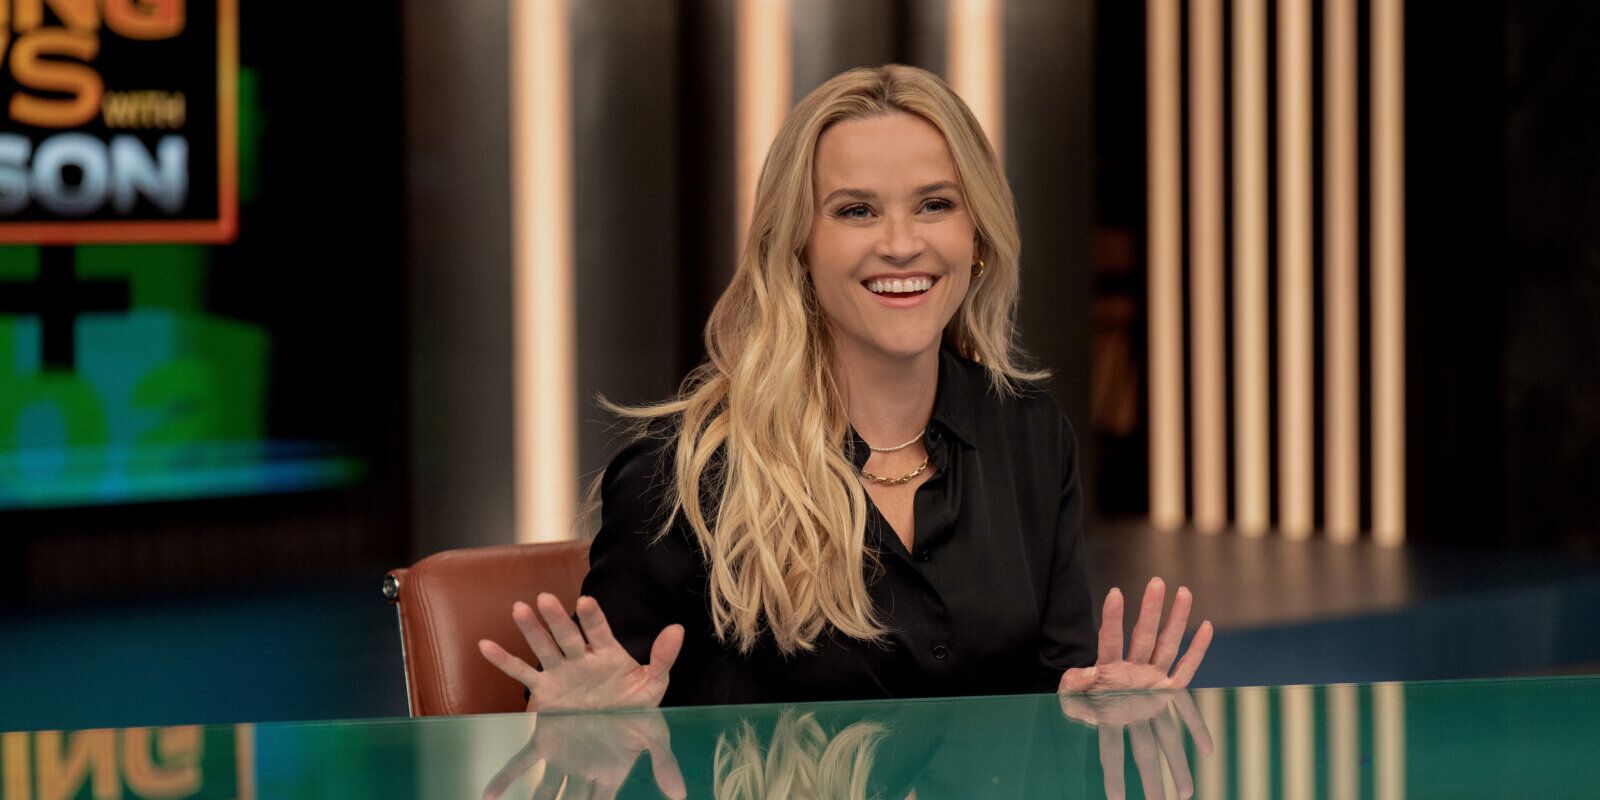 Reese Witherspoon As Bradley Jackson In The Morning Show Season 3.jpg